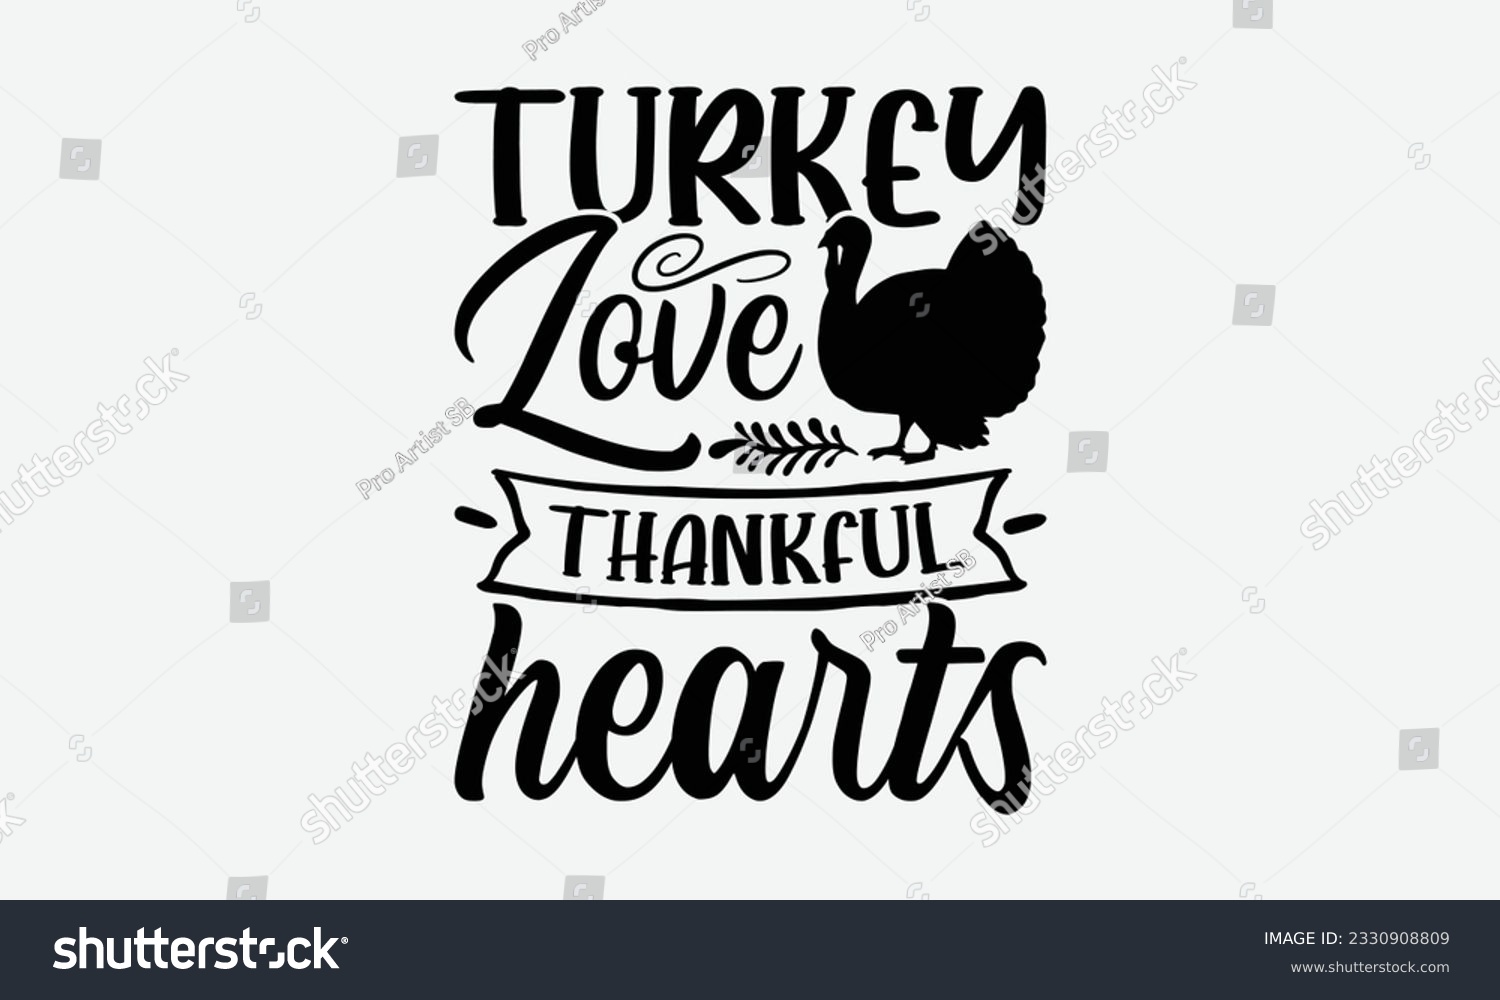 SVG of Turkey Love Thankful Hearts - Thanksgiving T-shirt Design Template, Happy Turkey Day SVG Quotes, Hand Drawn Lettering Phrase Isolated On White Background. svg